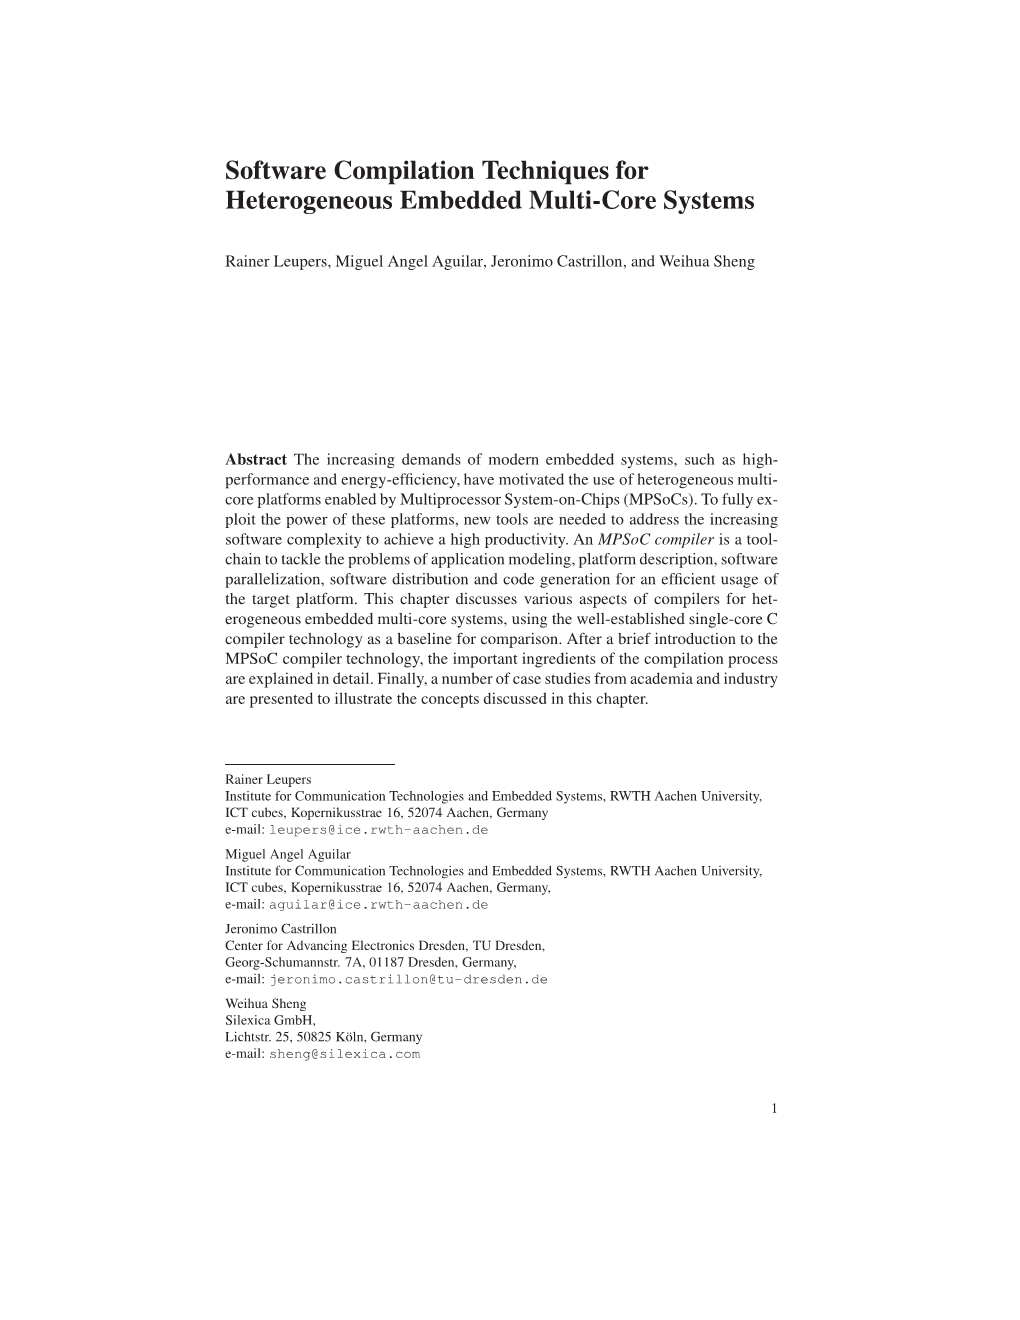 Software Compilation Techniques for Heterogeneous Embedded Multi-Core Systems